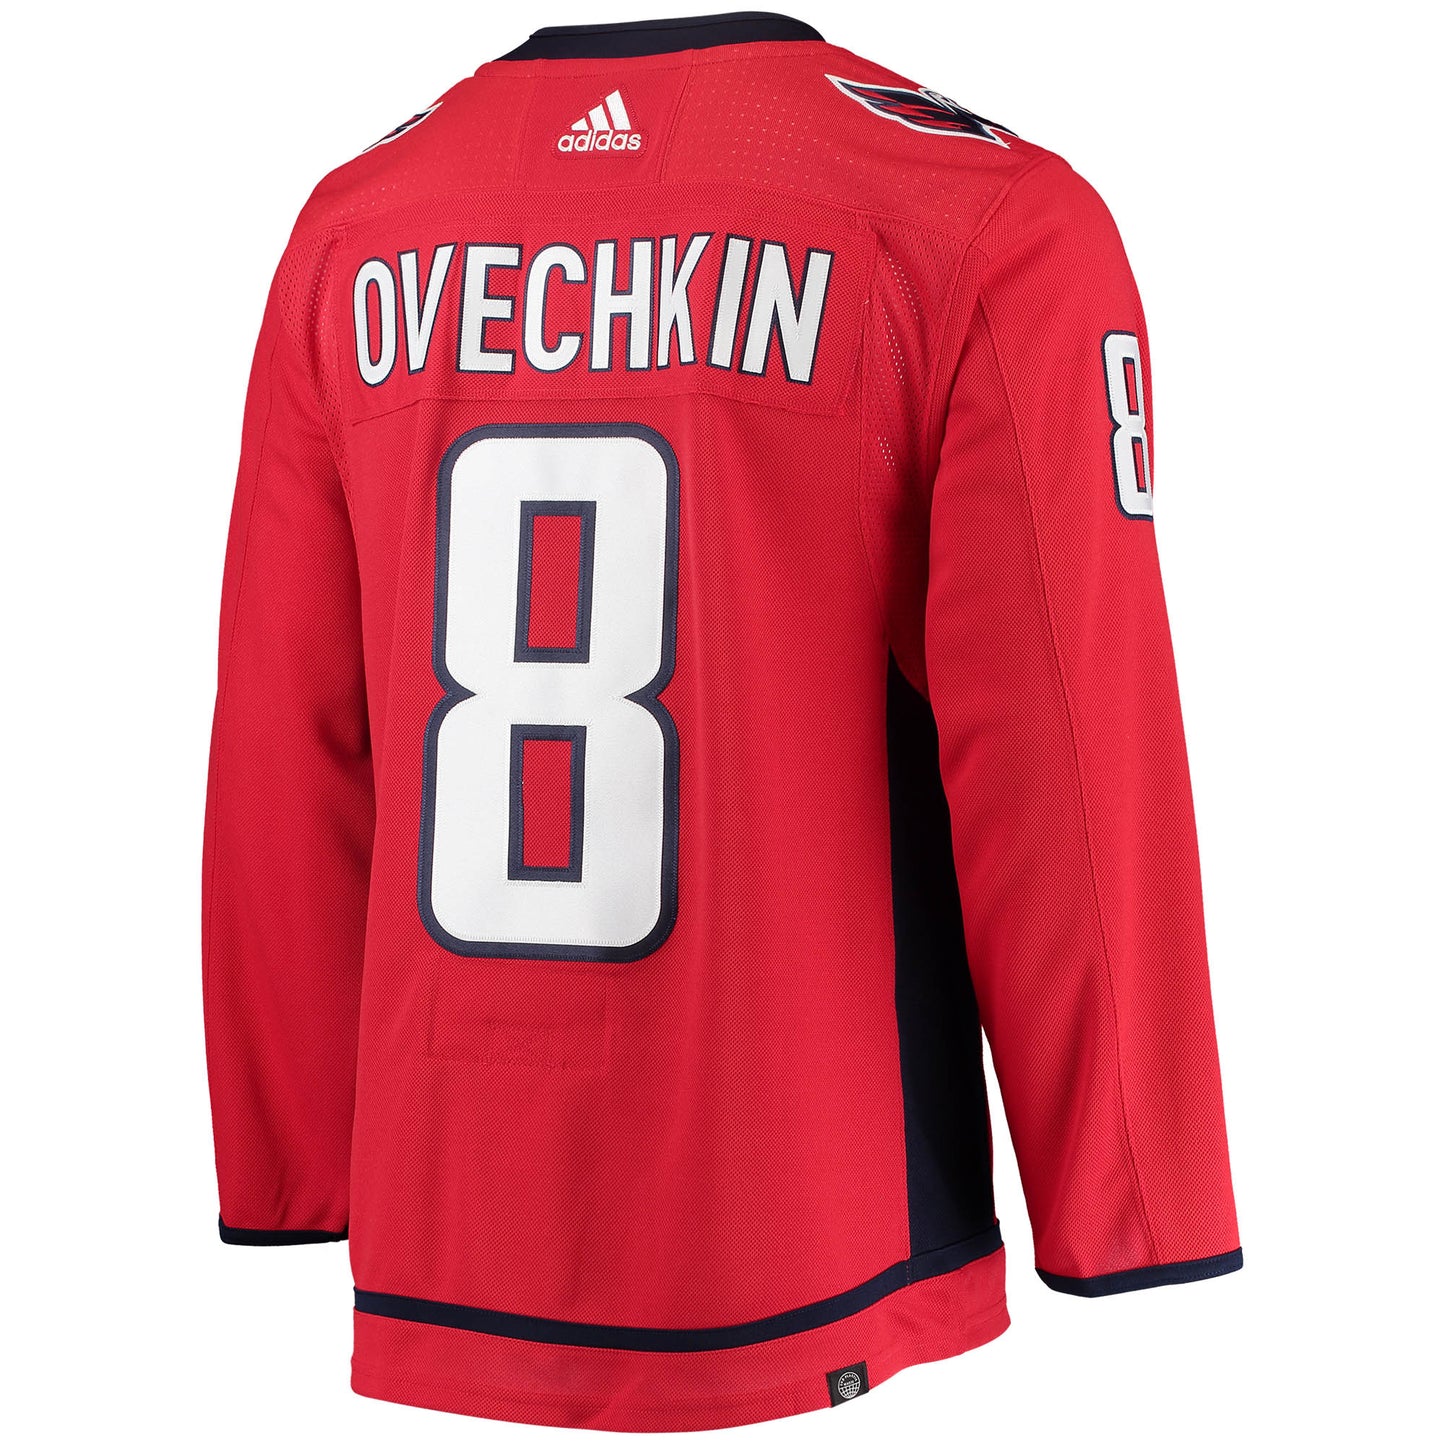 Alexander Ovechkin Washington Capitals adidas Home Captain Patch Primegreen Authentic Pro Player Jersey - Red